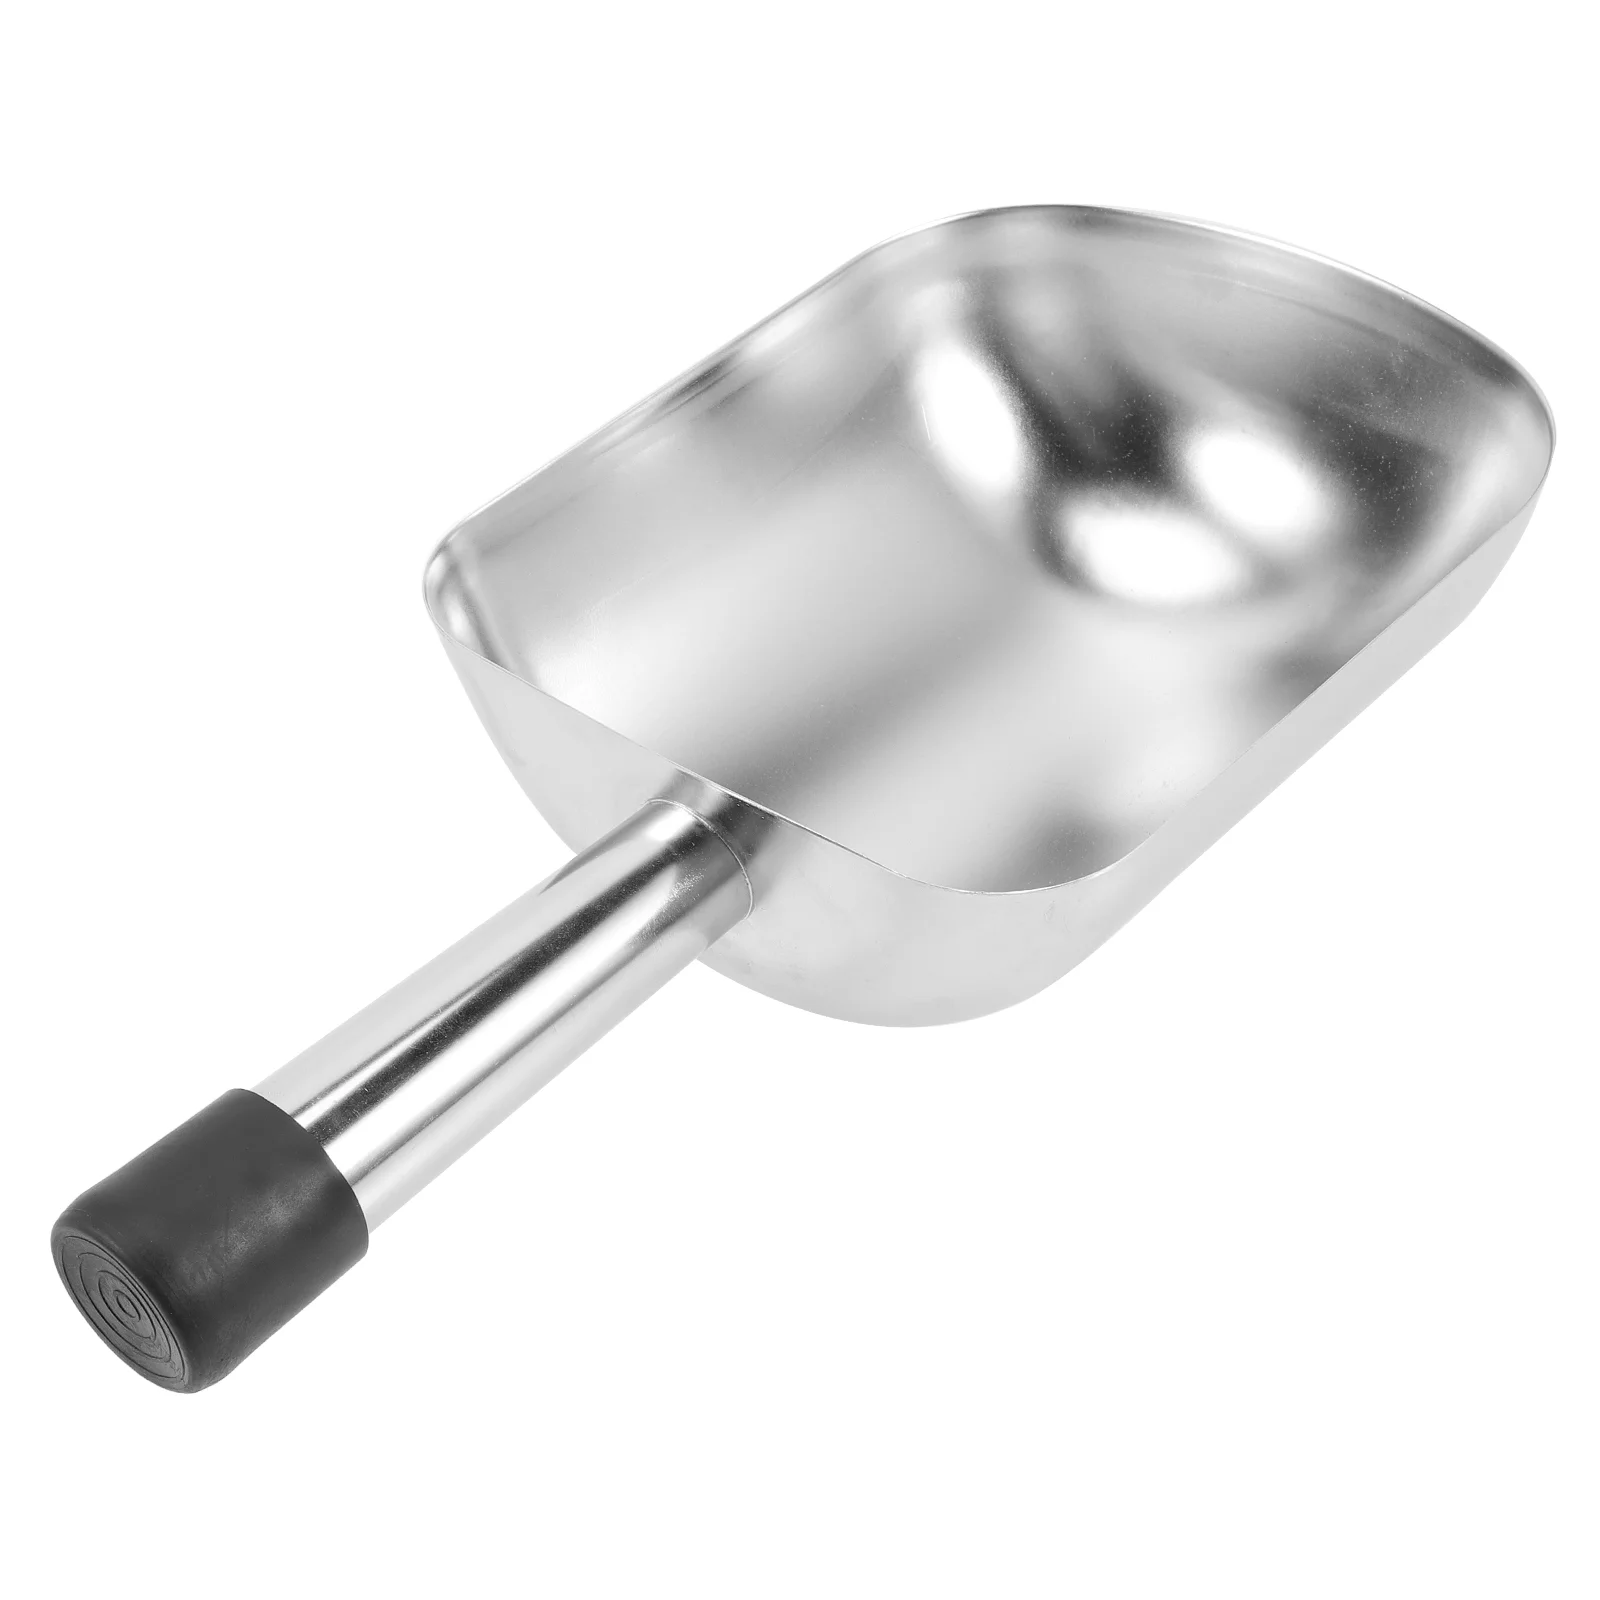 

Scoop Ice Scoops Flour Kitchen Scooper Metal Candy Cube Bar Utility Steel Stainless Bean Pet Grain Coffee Sugar Refrigerator